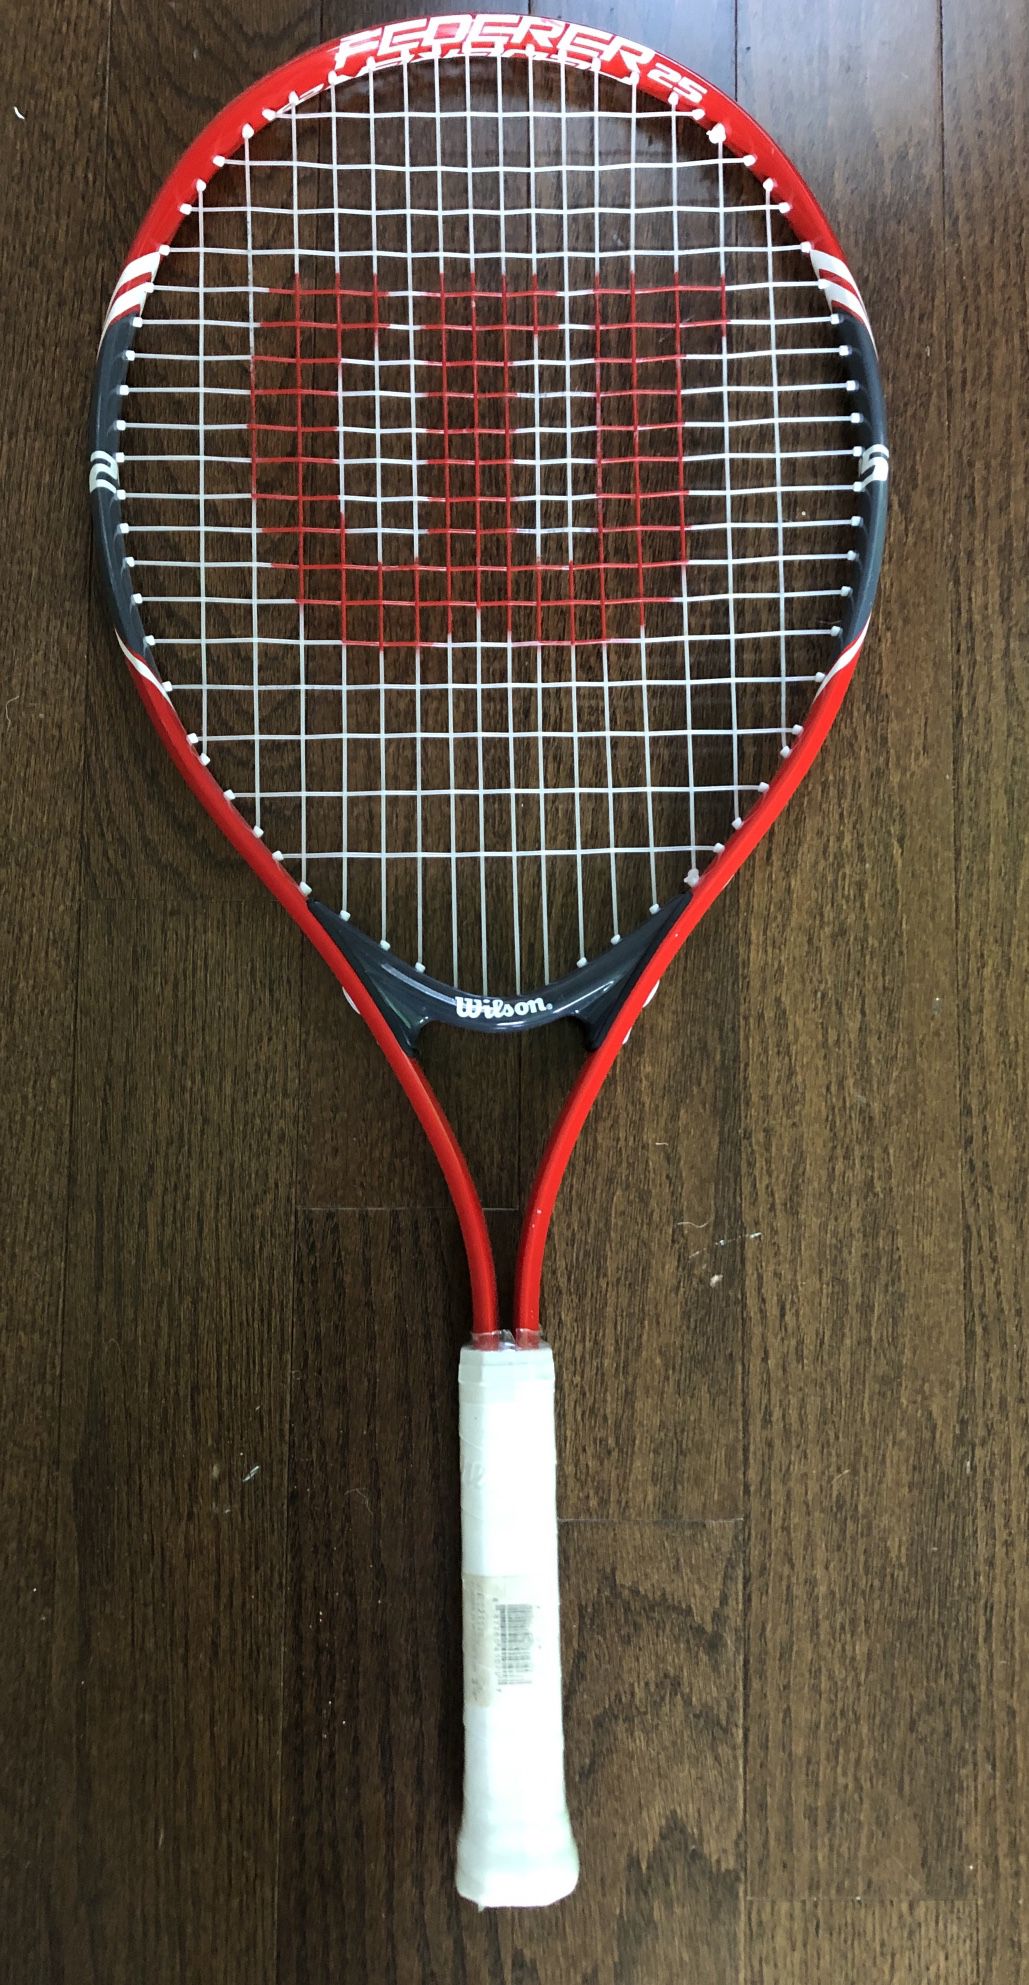 Youth Tennis Racket (Never Used)